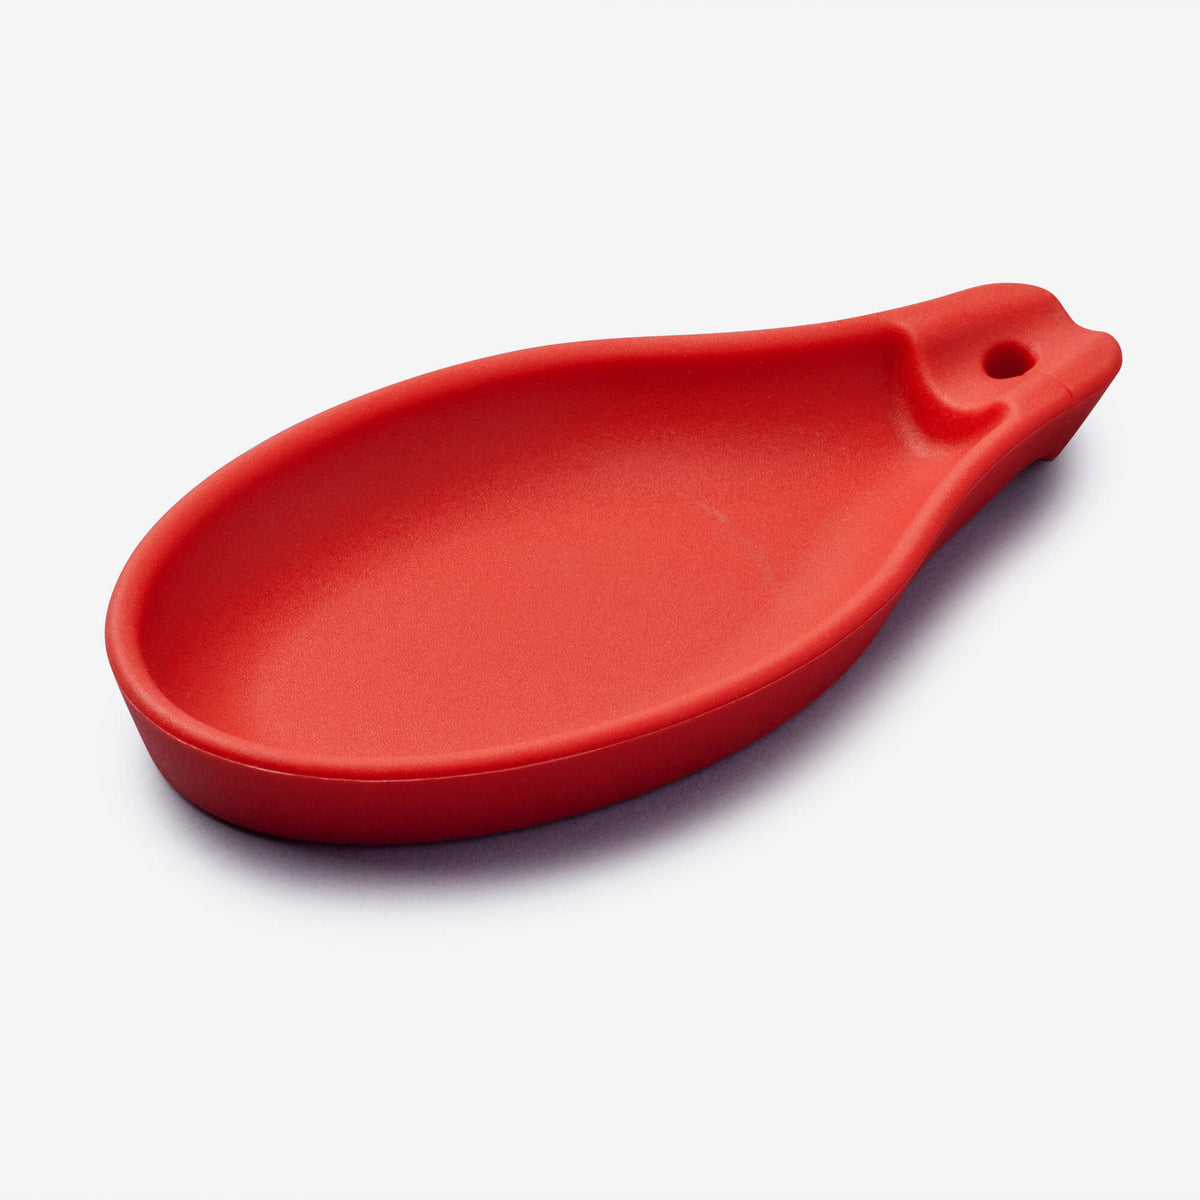 Zeal 4 in 1 Double Sided Measuring Spoon - Red 